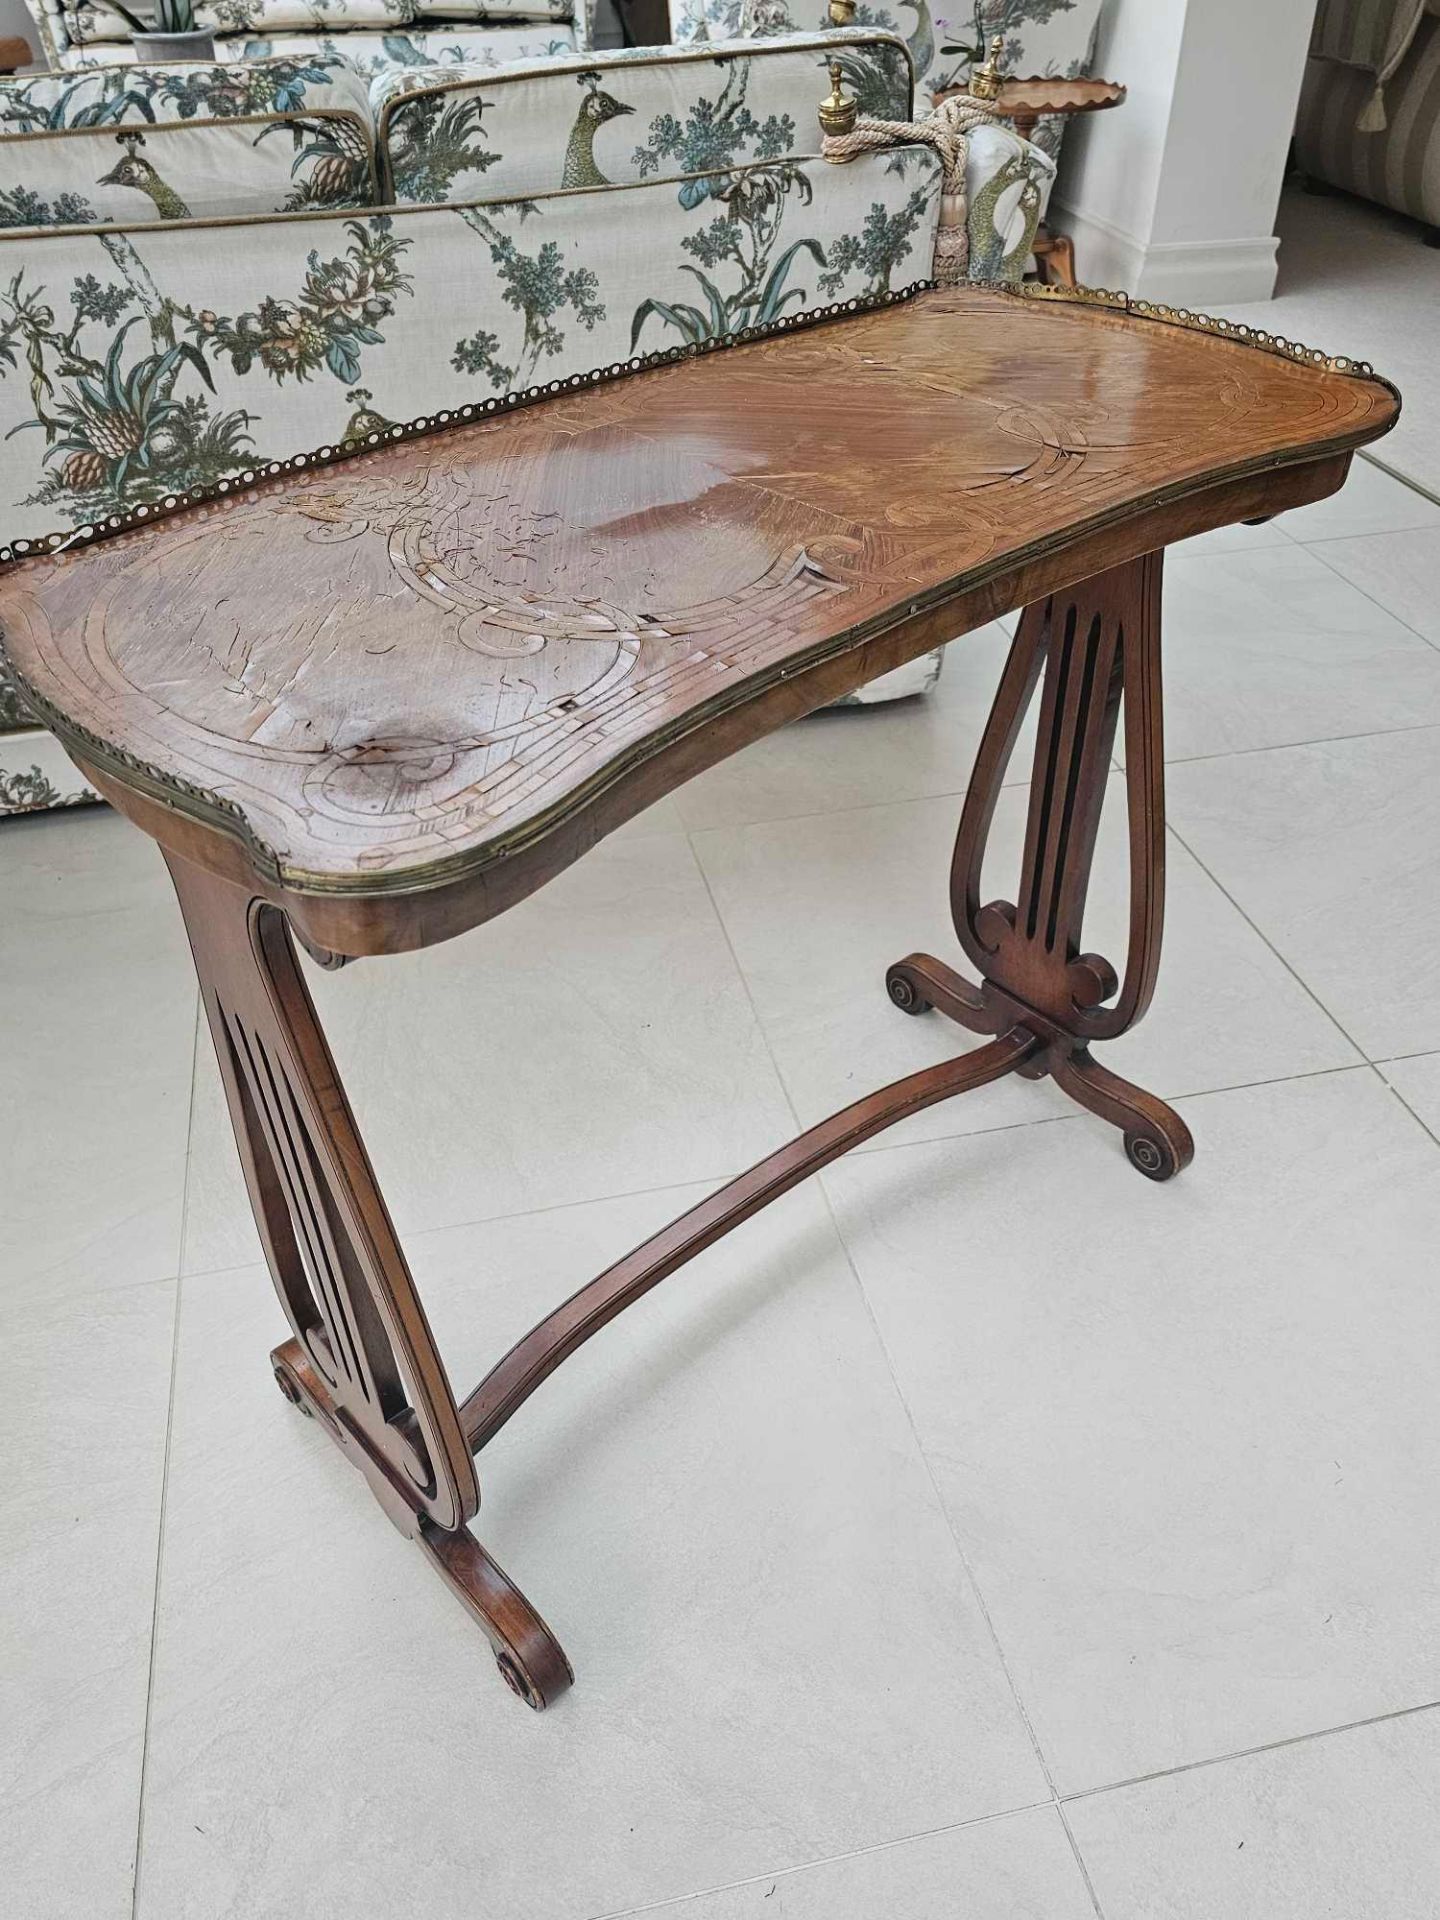 A Louis XVI Style Kingswood And Tulipwood Banded Side Table The Shaped Decorated Top With A - Image 5 of 5